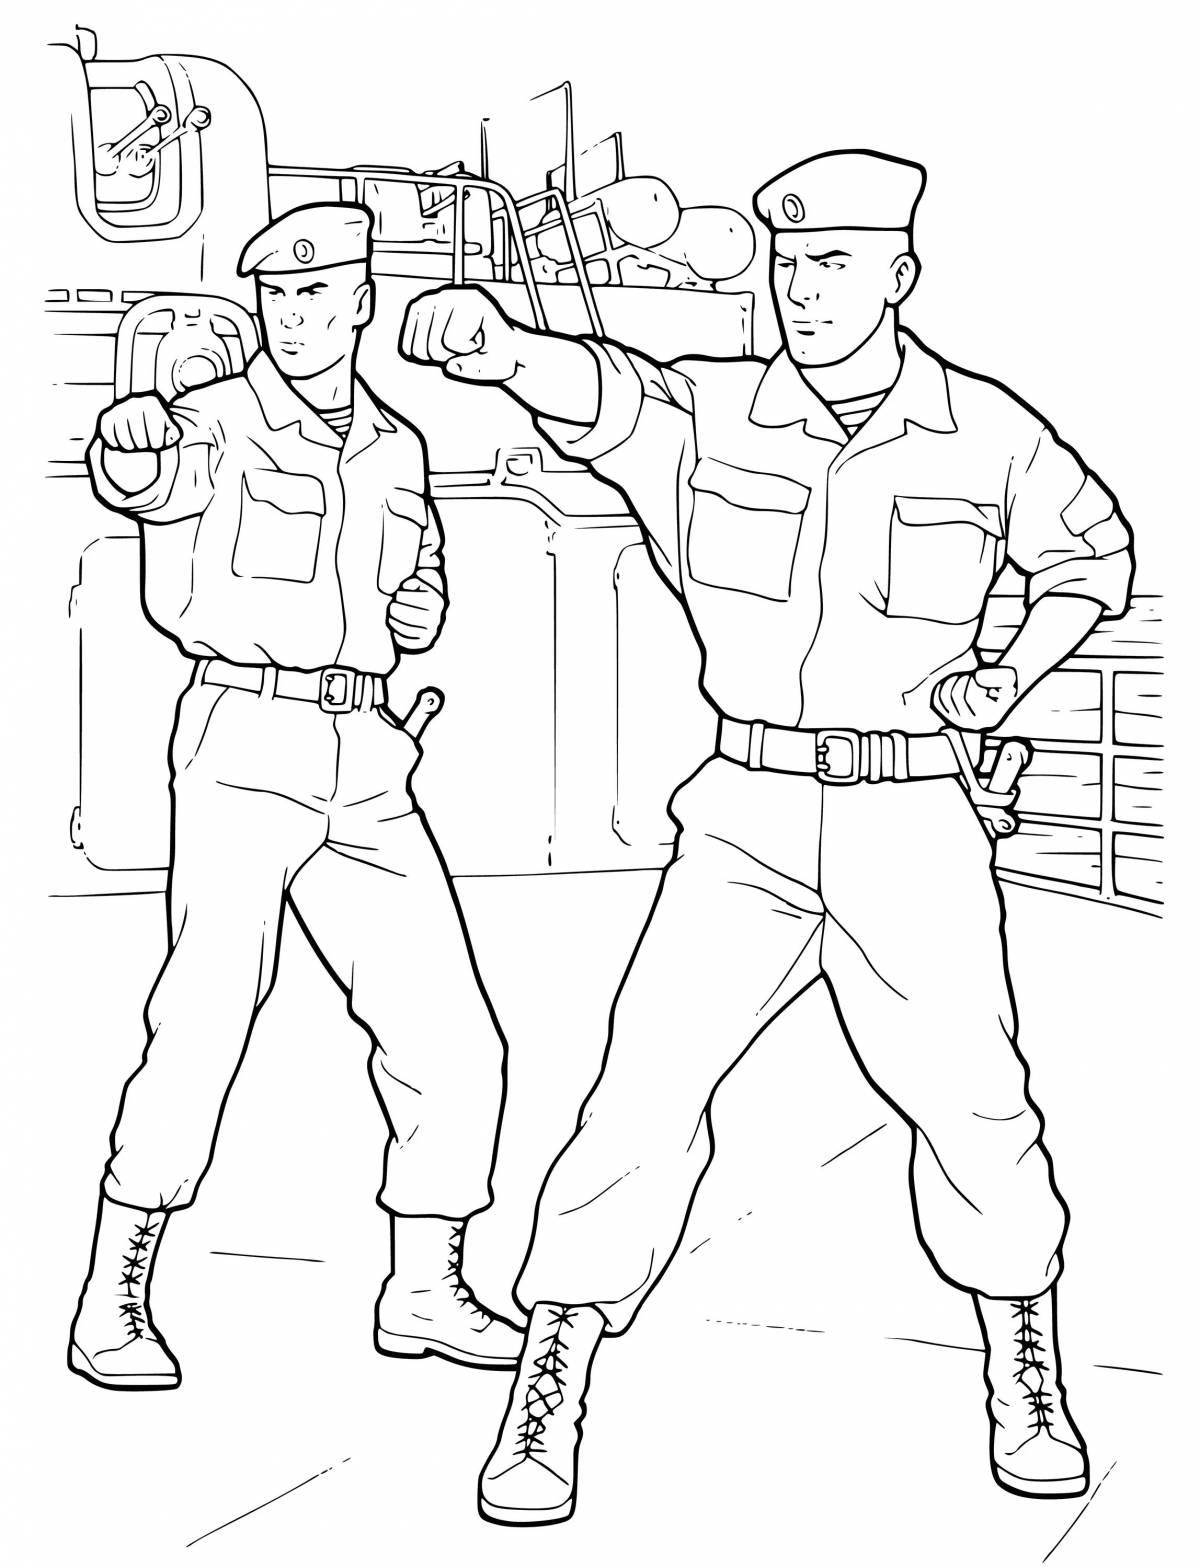 Benevolent Soldier Coloring Pages for Boys